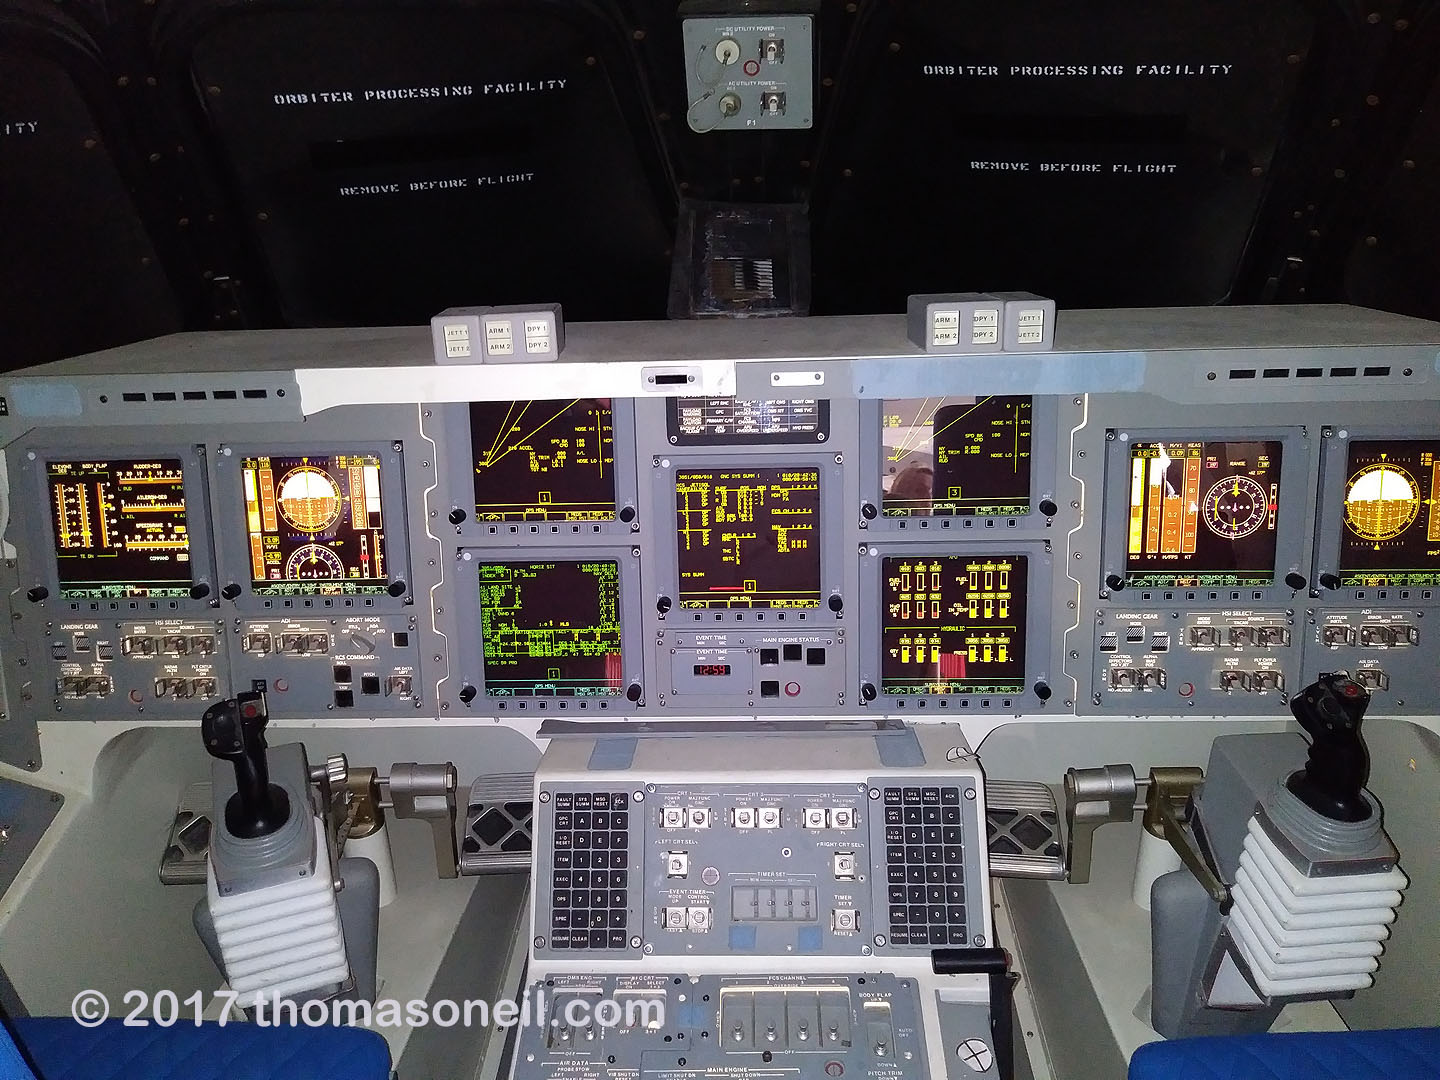 Control panel for Space Shuttle replica Independence, Johnson Space Center, Houston, July 2017.  Click for next photo.